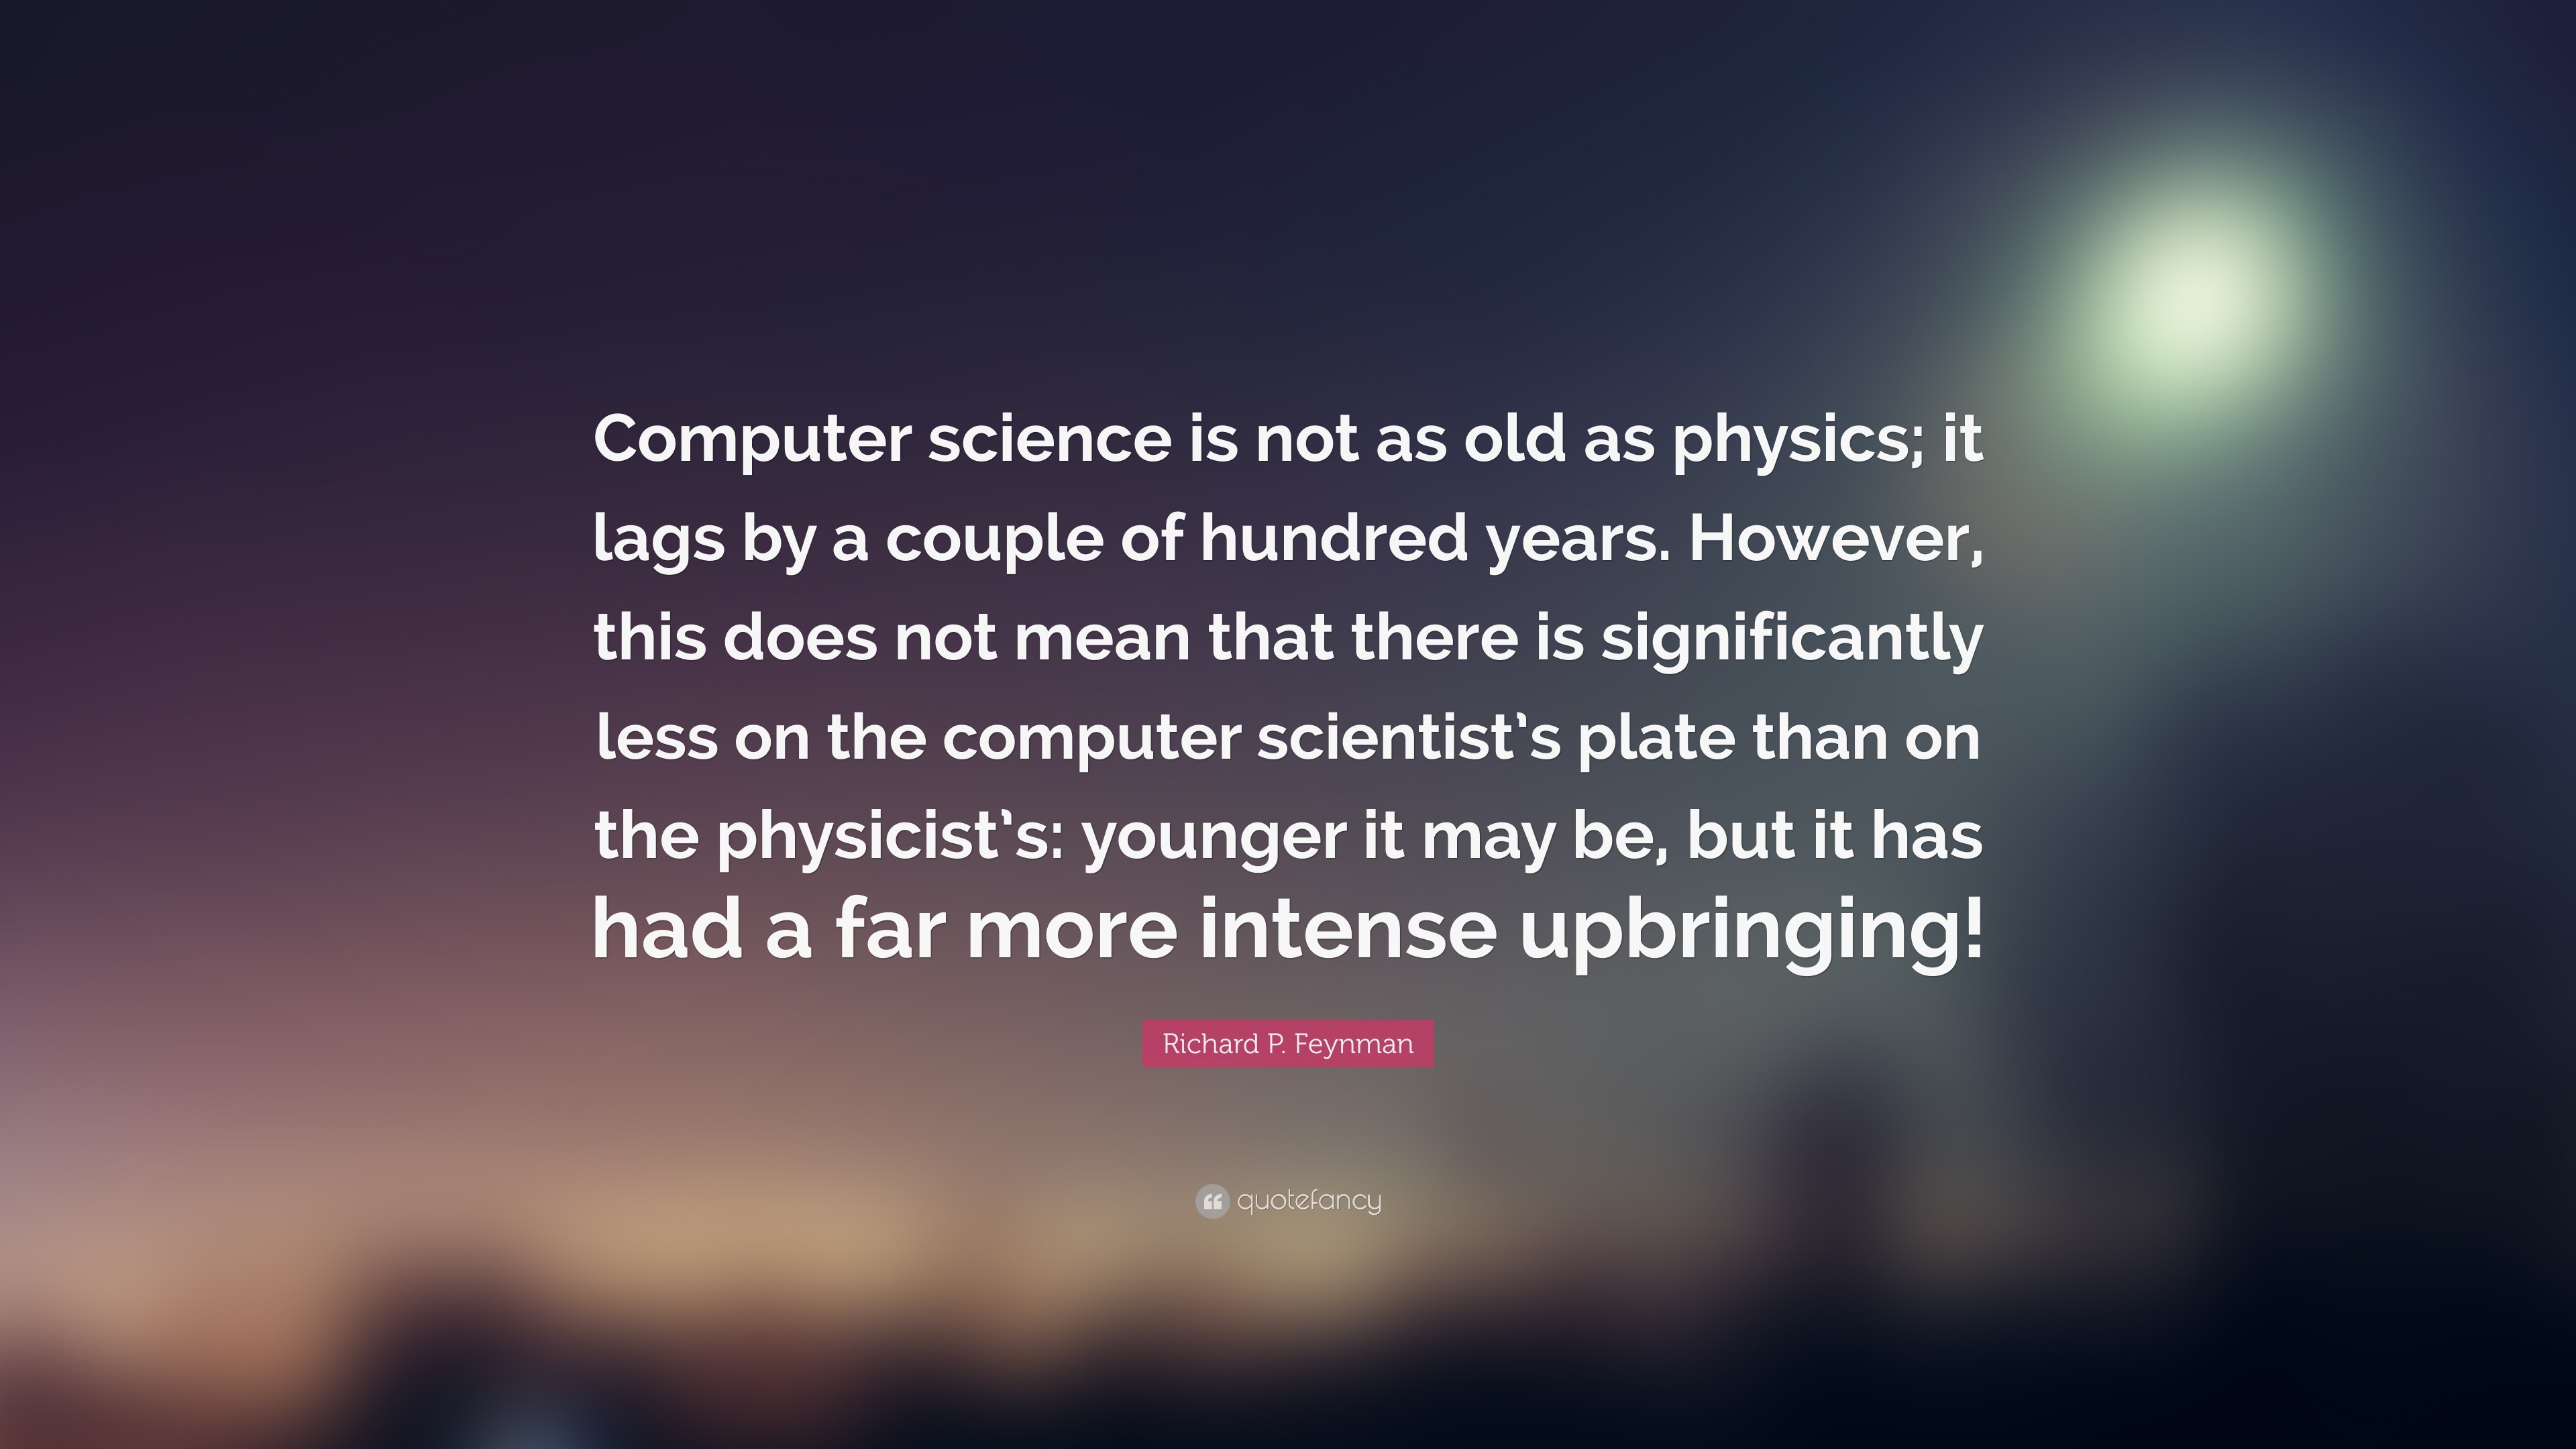 Richard P. Feynman Quote: “Computer science is not as old as physics